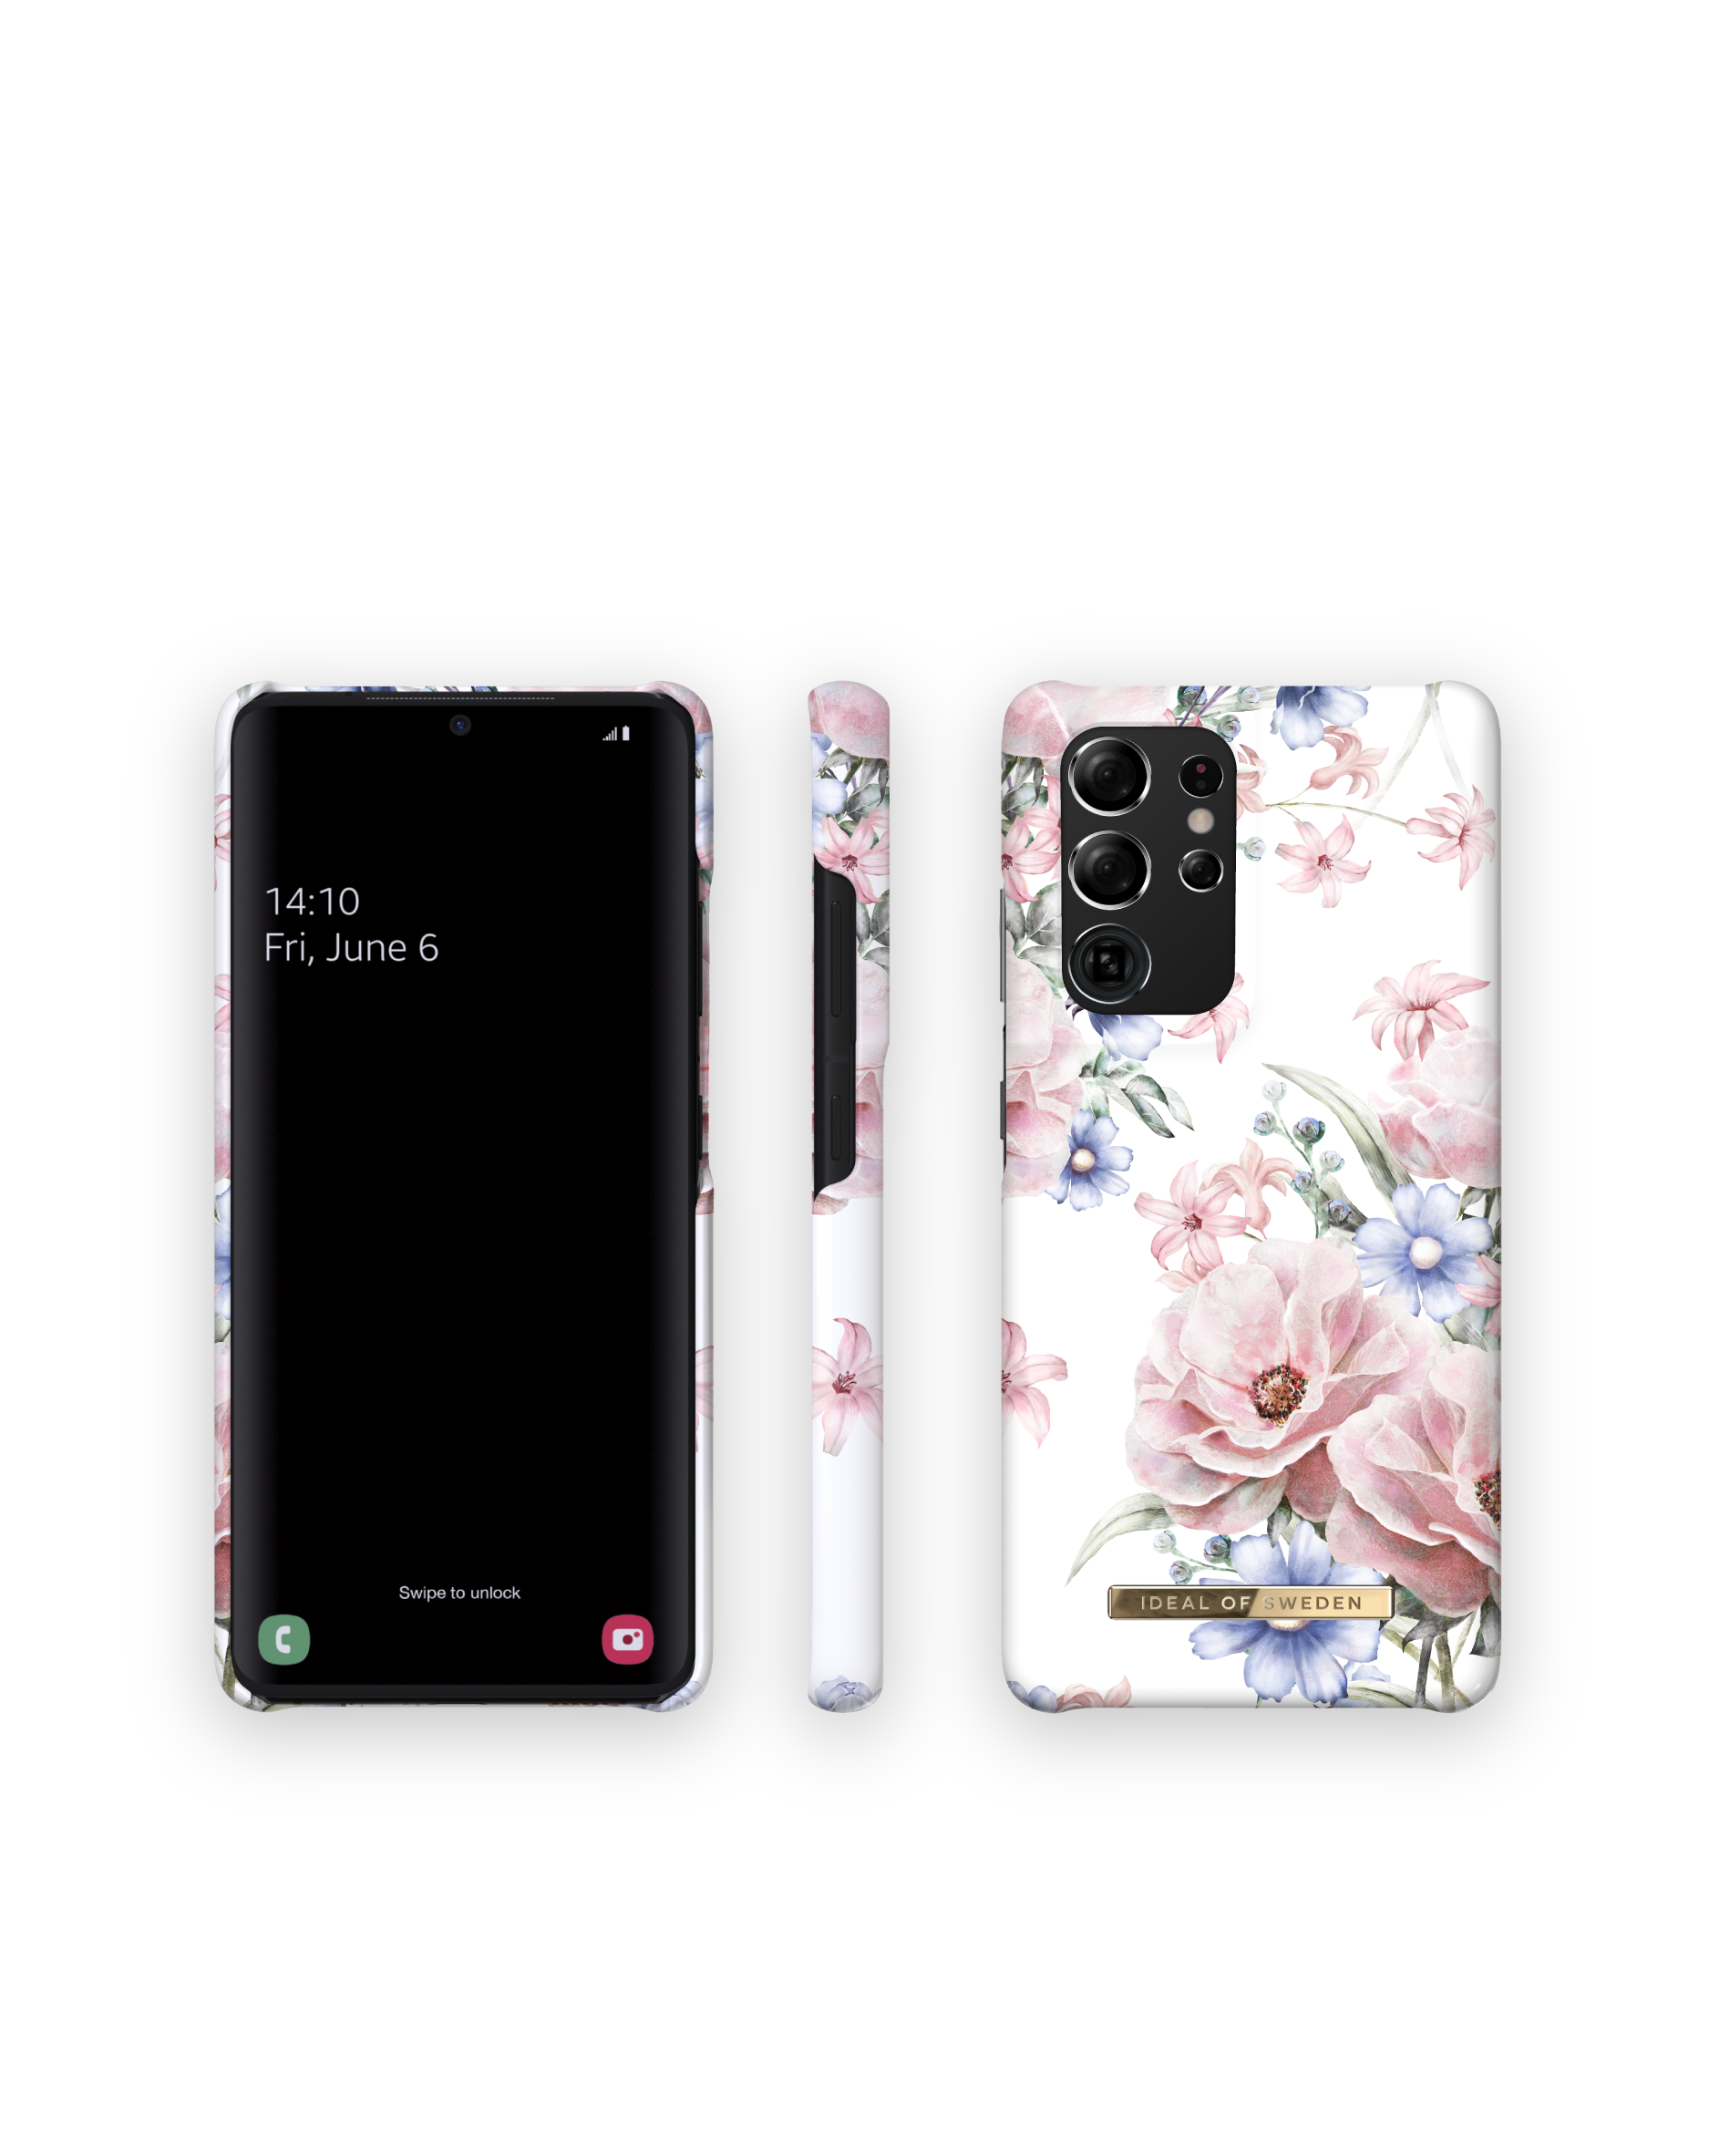 IDEAL OF Galaxy Romance Ultra, Backcover, Samsung, SWEDEN IDFCS17-S21U-58, Floral S21